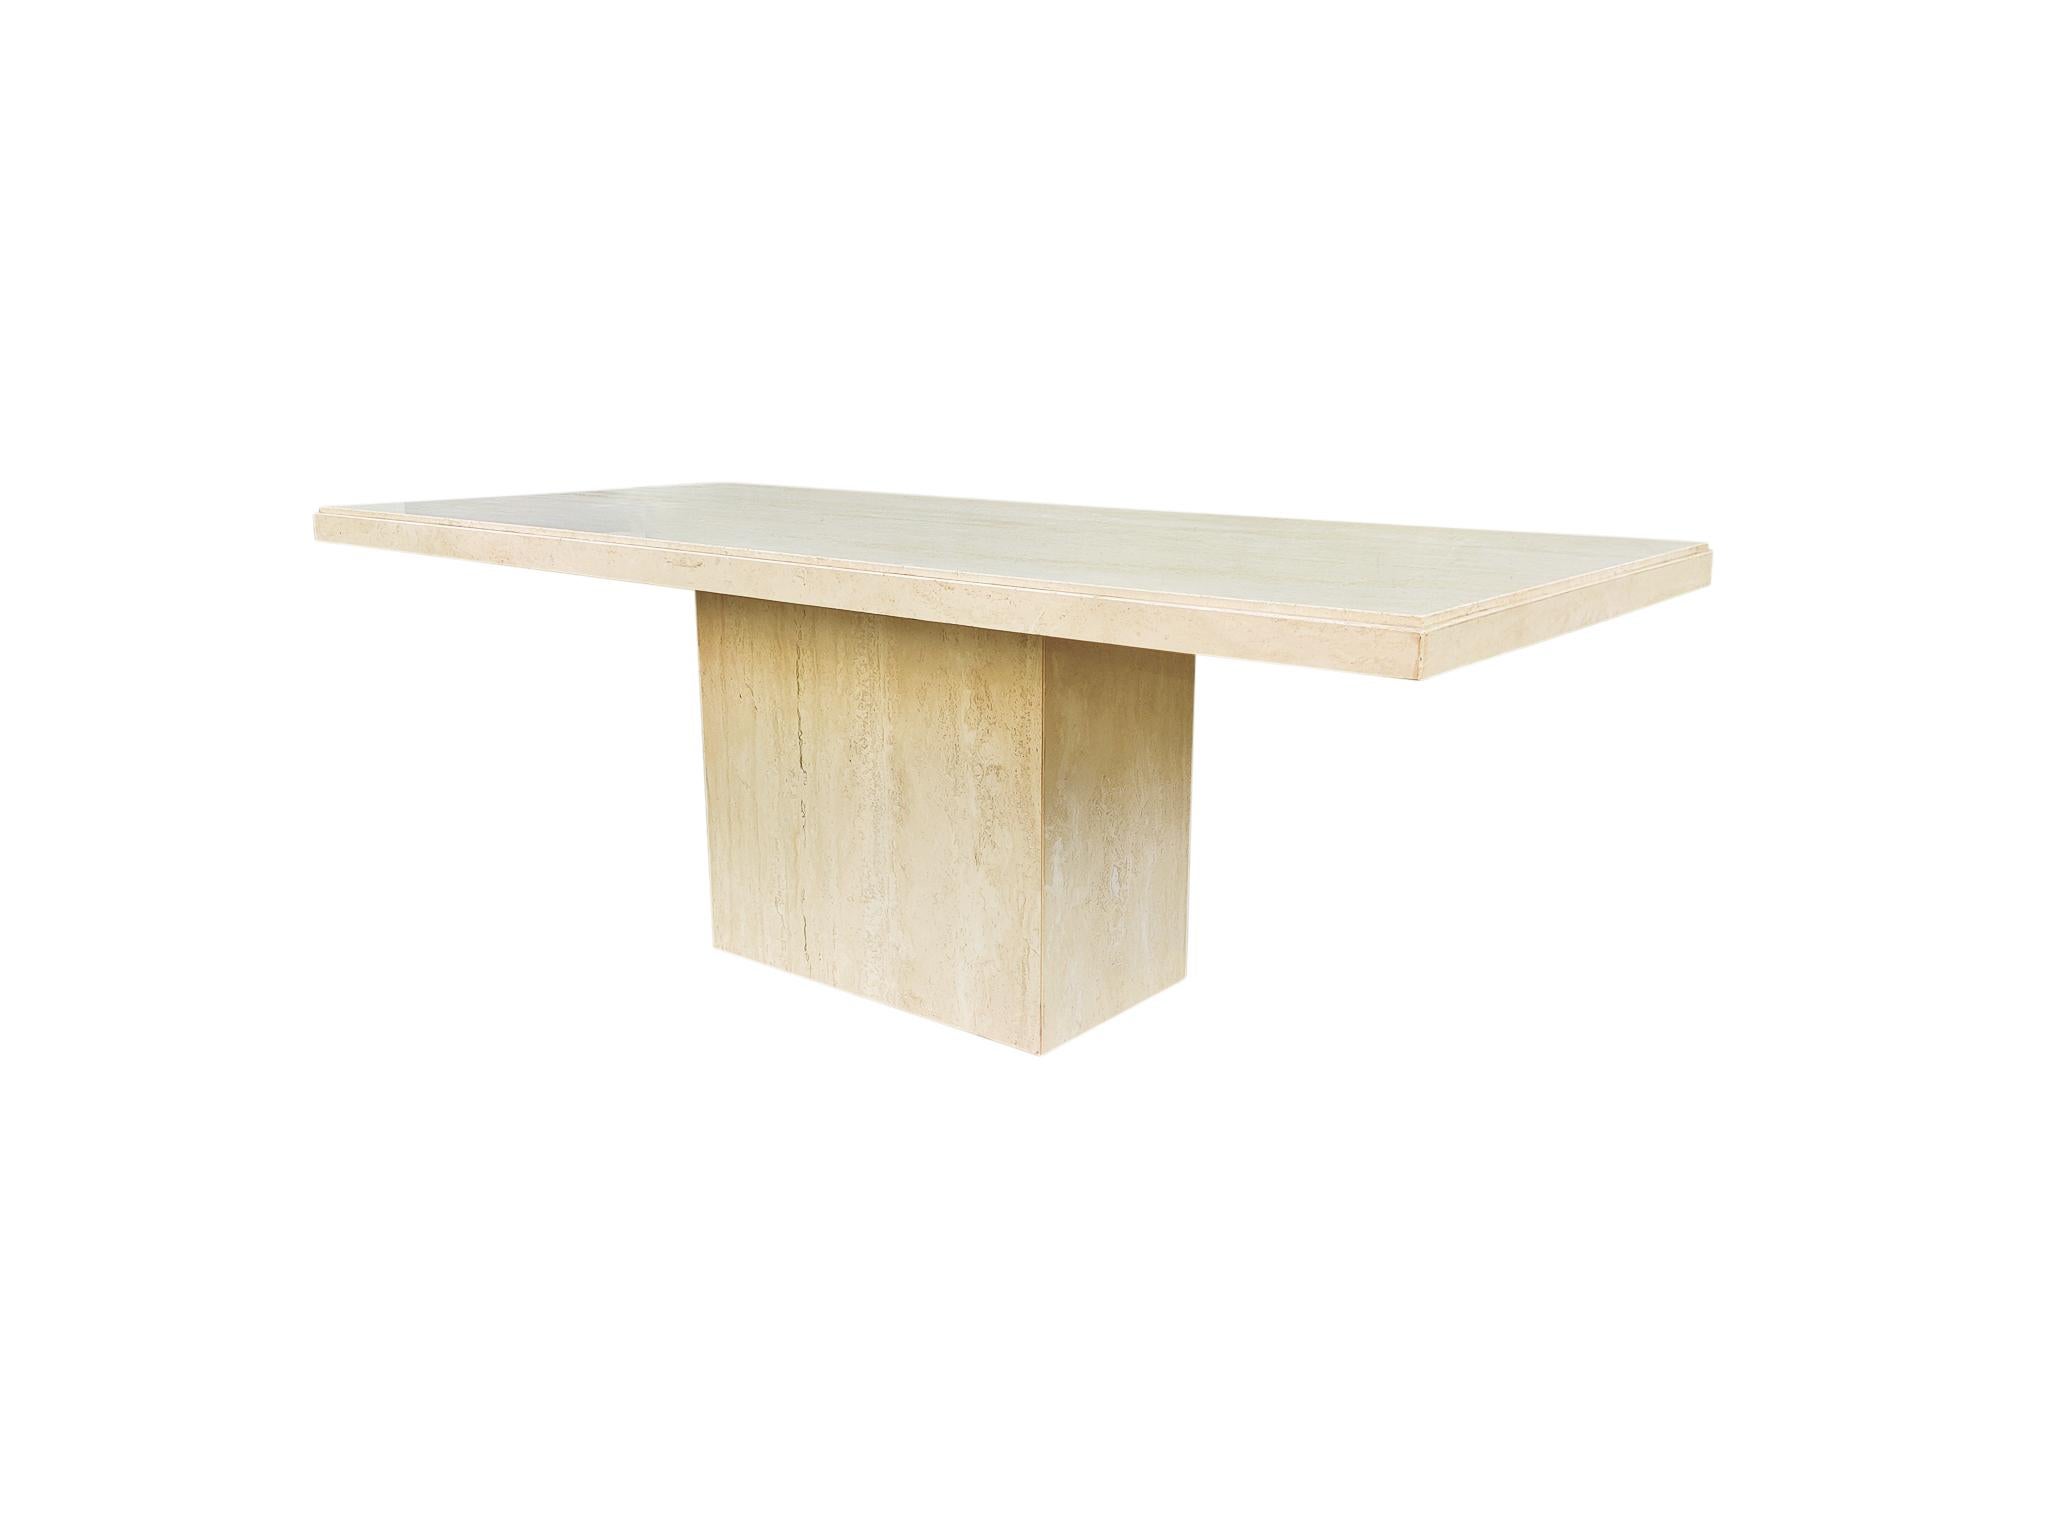 Late 20th Century 1970s Italian Travertine Dining, Conference Table, Desk, Rectangle Post-Modern